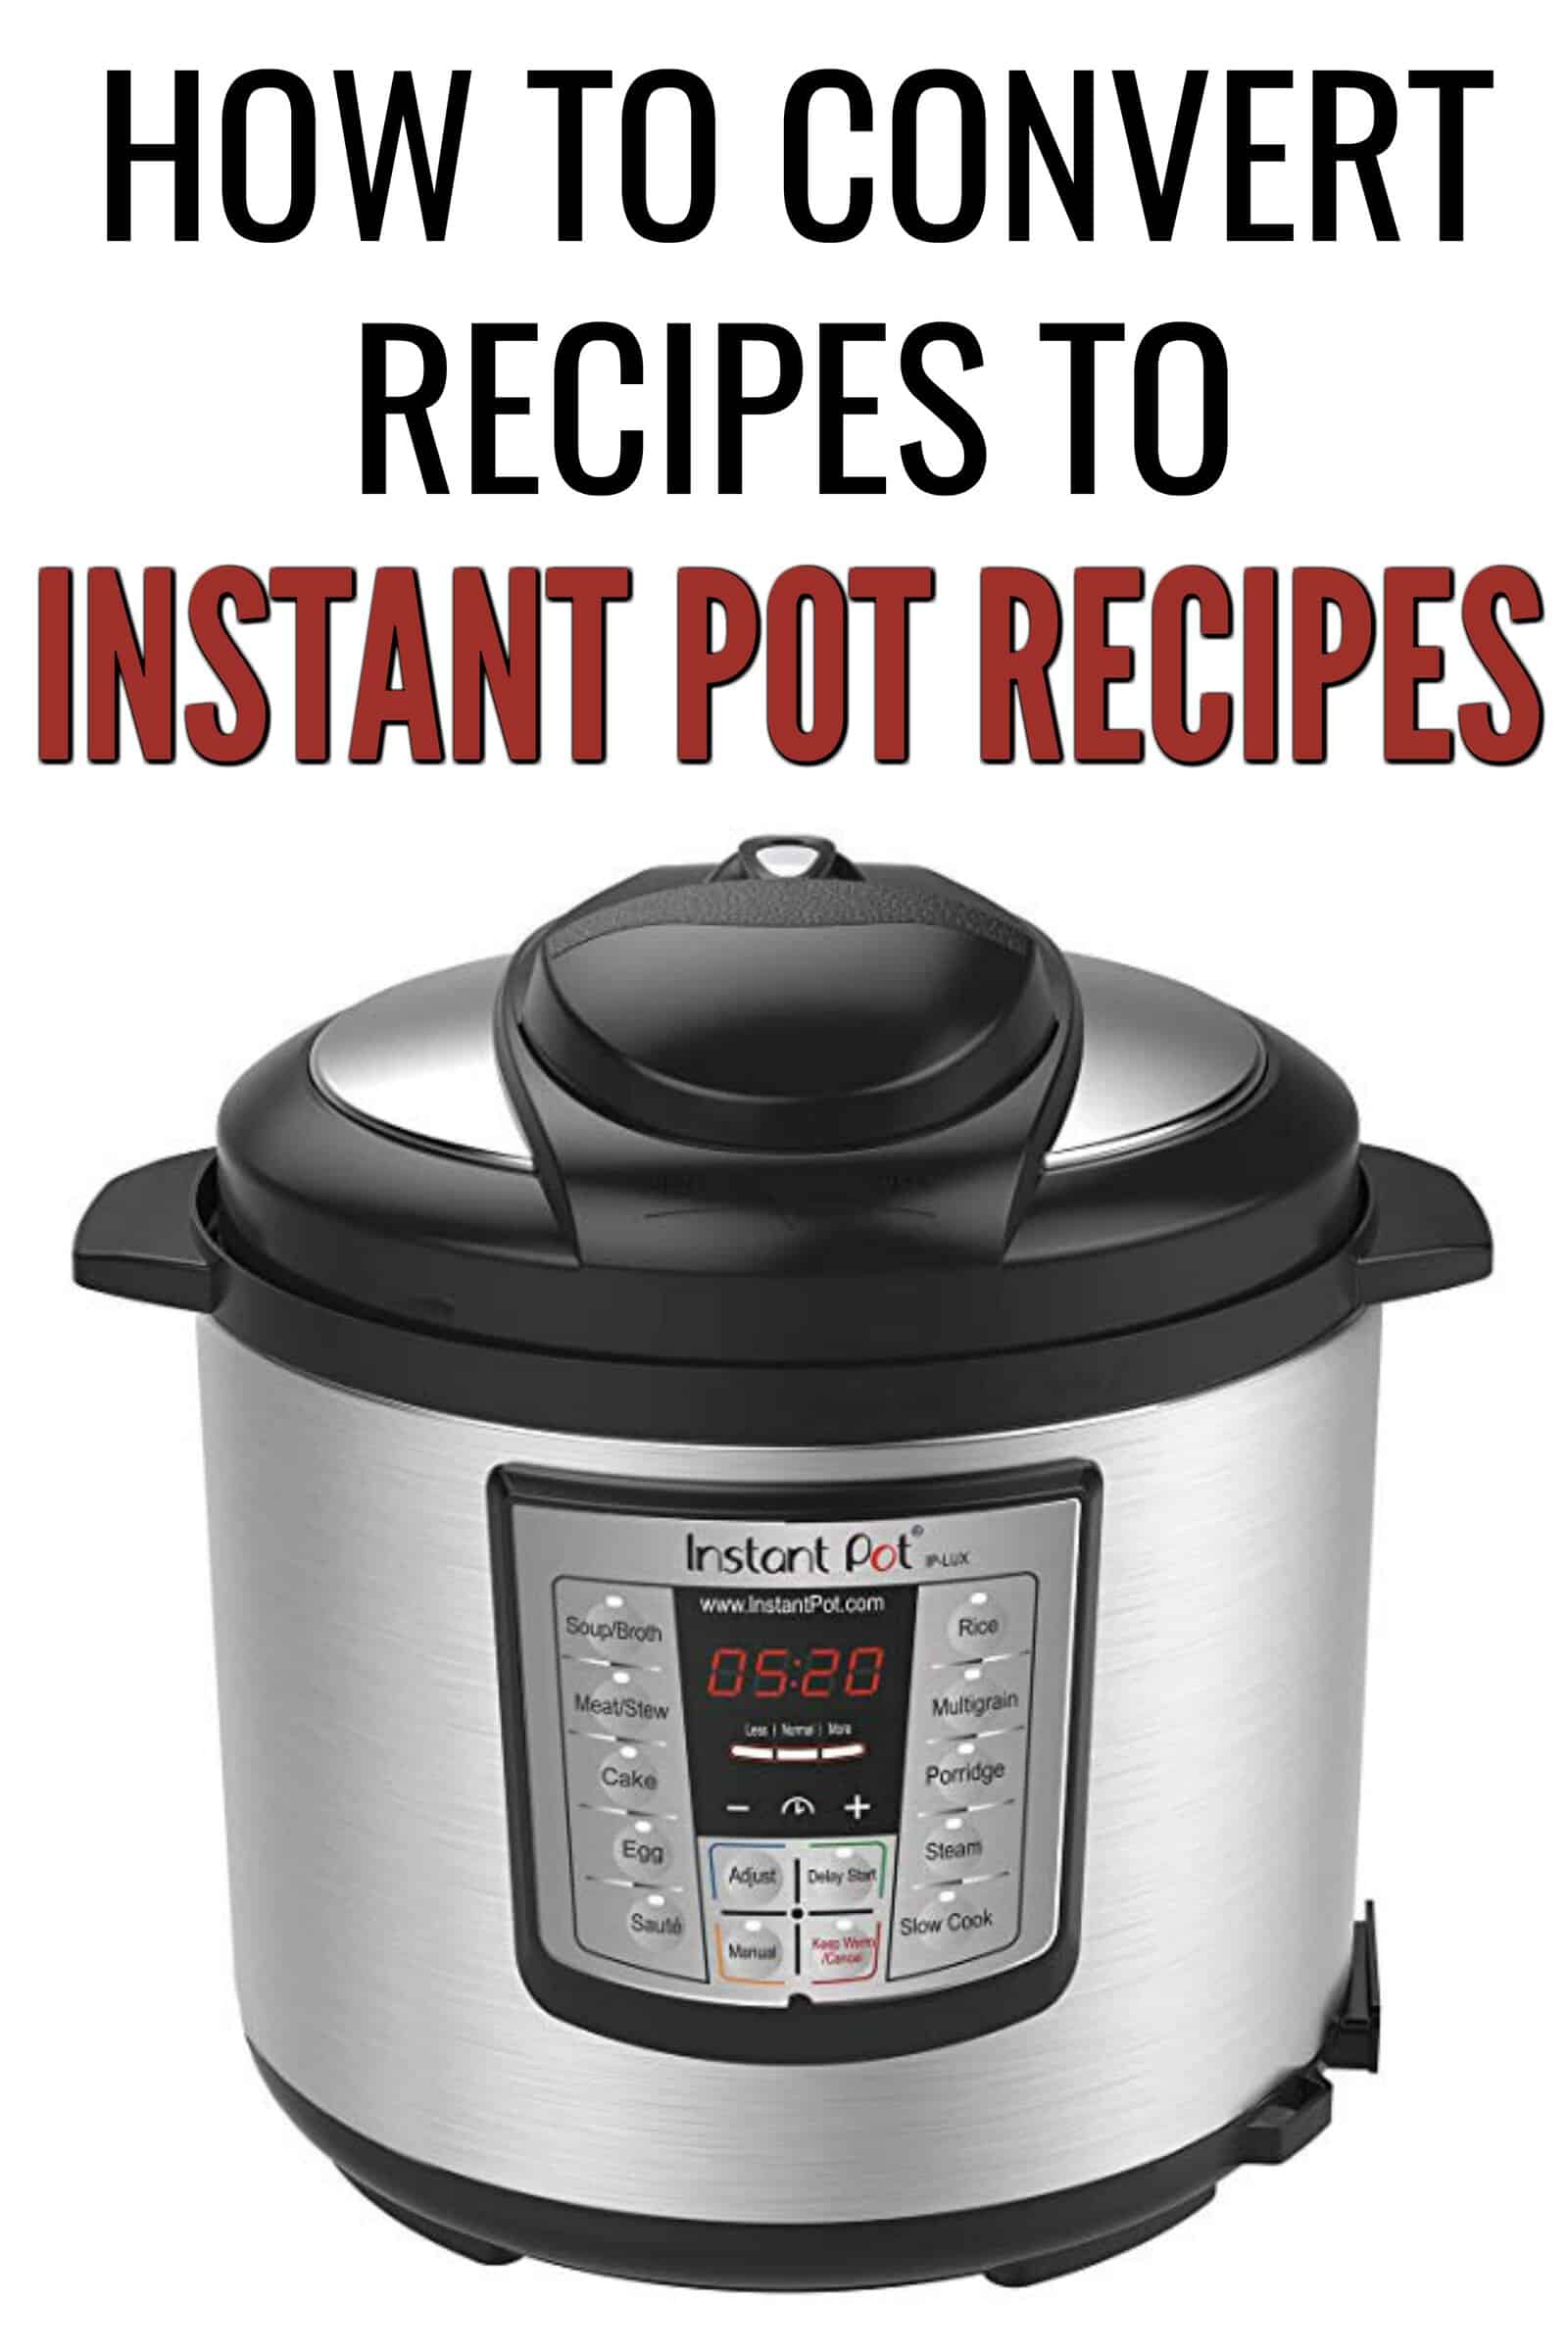 The BEST Instant Pot Breakfast Recipes - Slow Cooker or Pressure Cooker